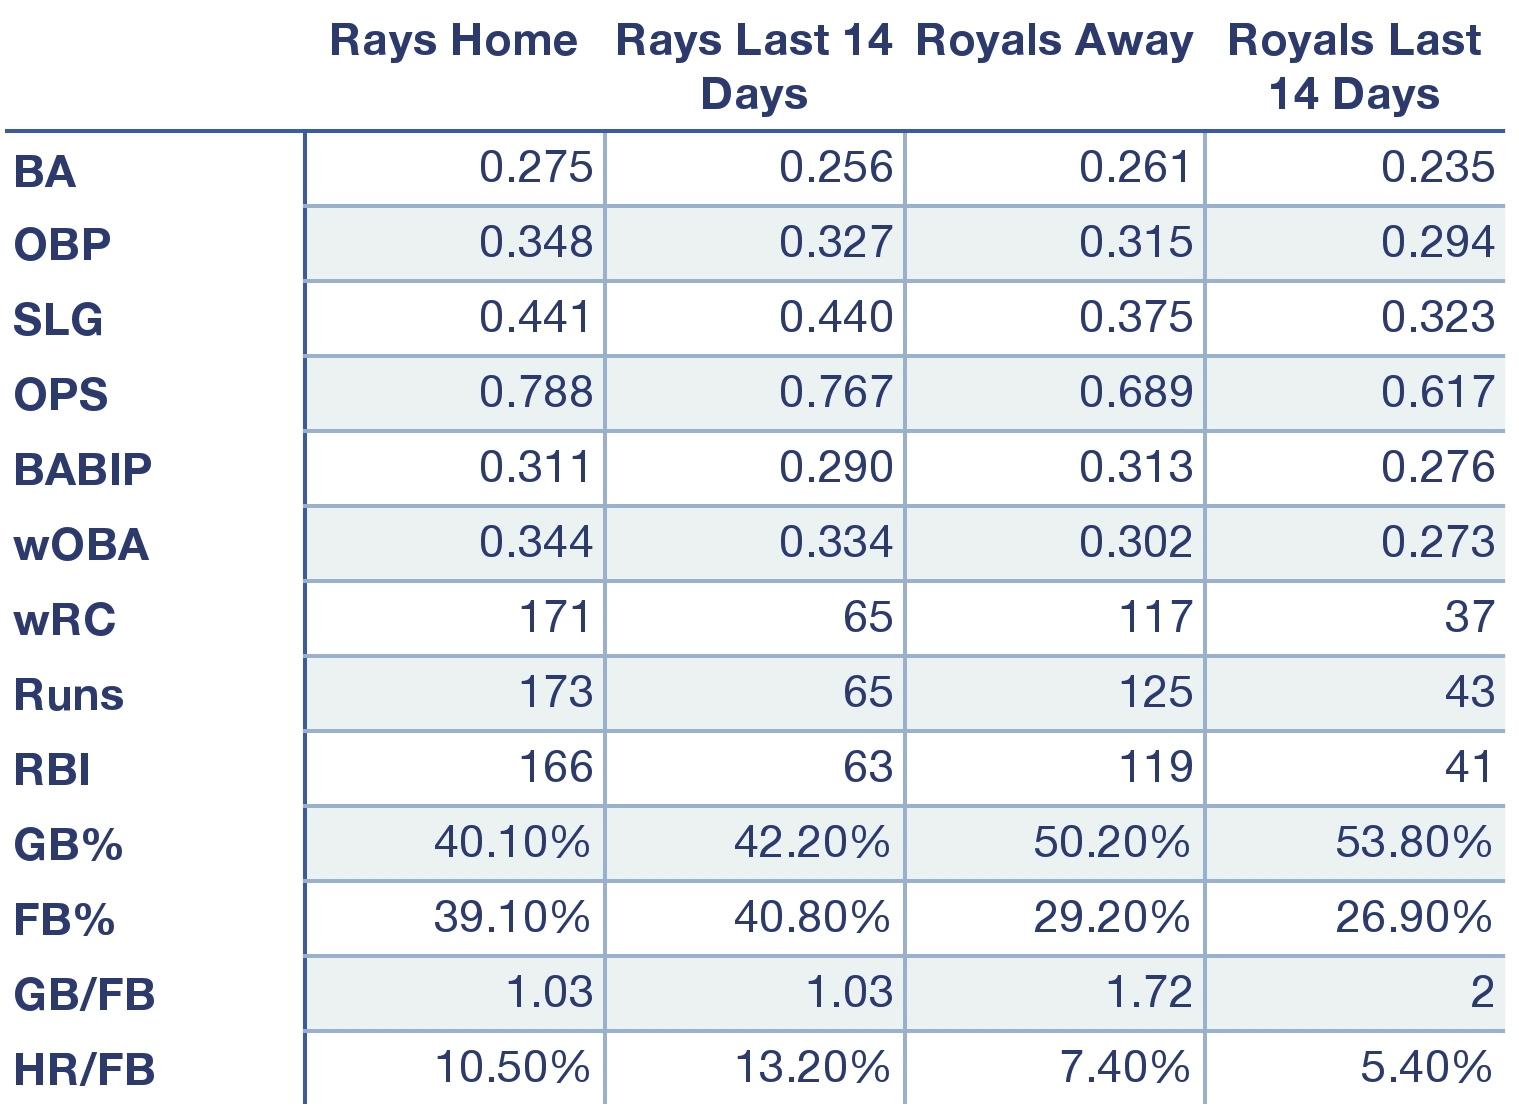 Rays and Royals offensive production at home, away, and over the last 14 days